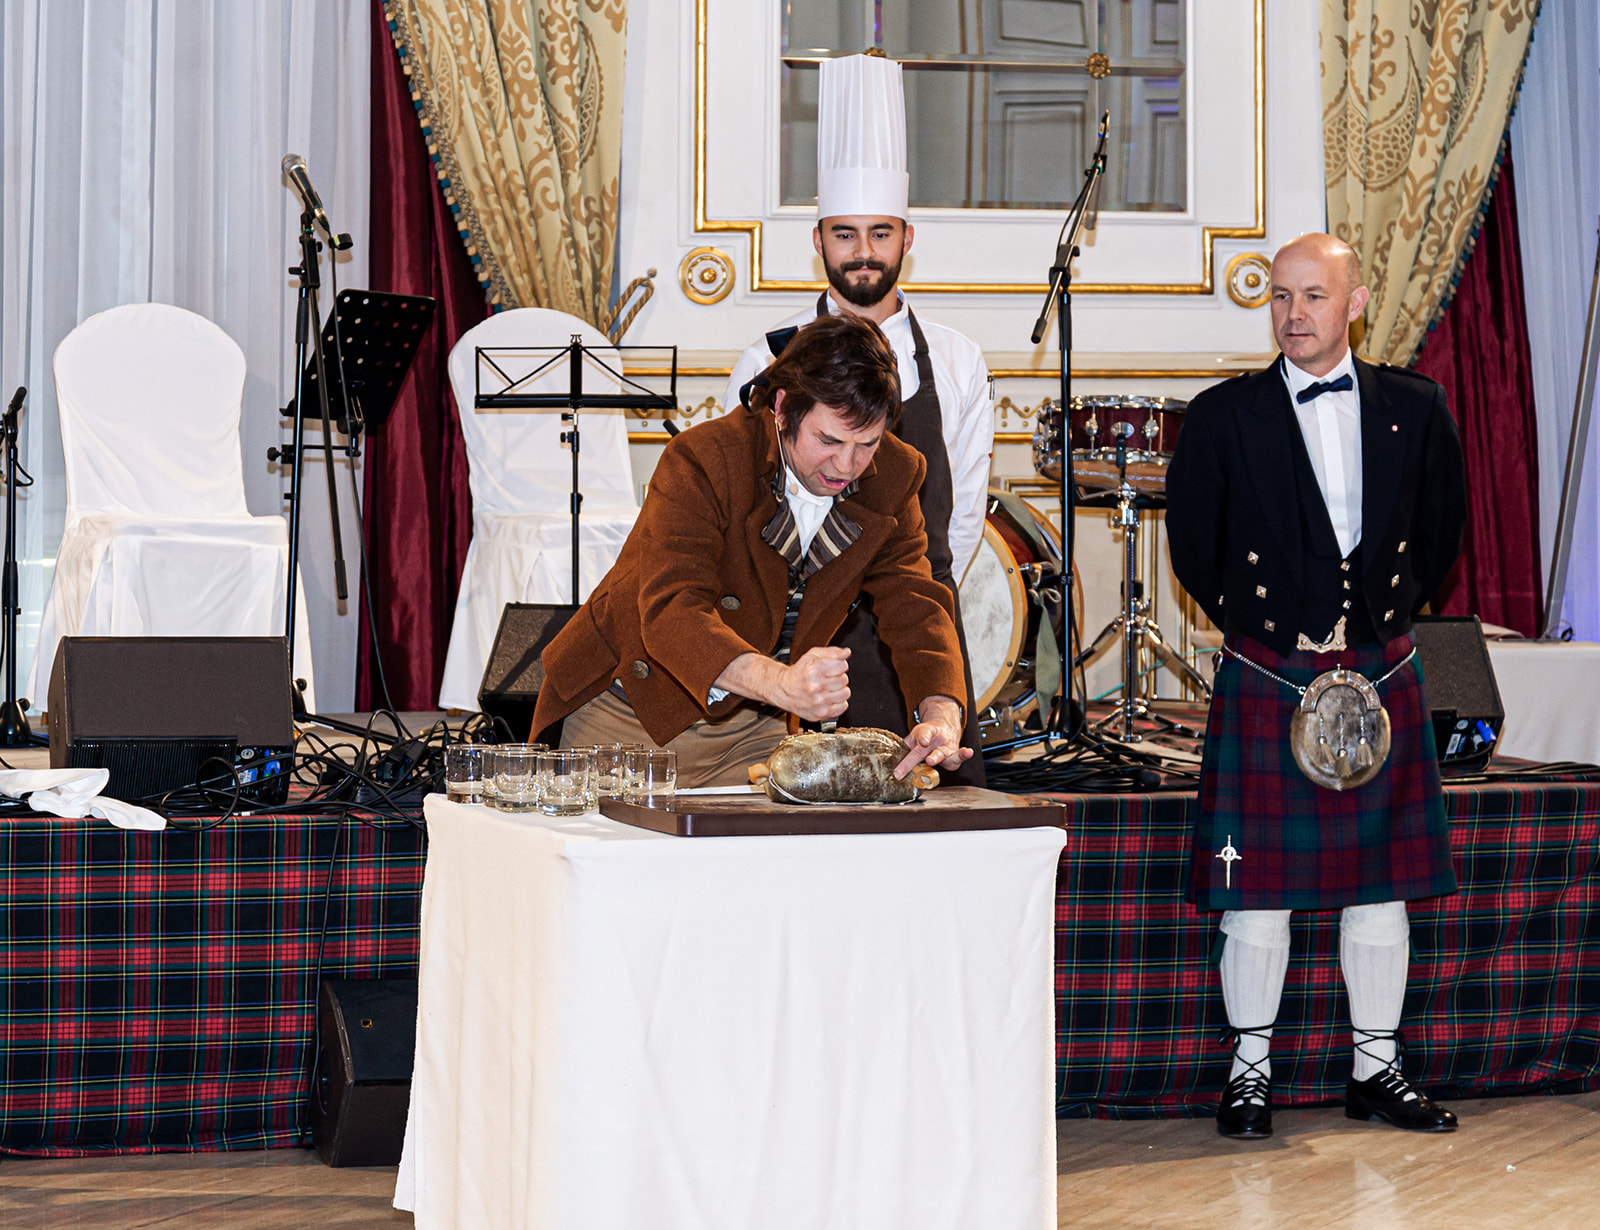 Projects Supported by the 2023 Budapest Burns Supper